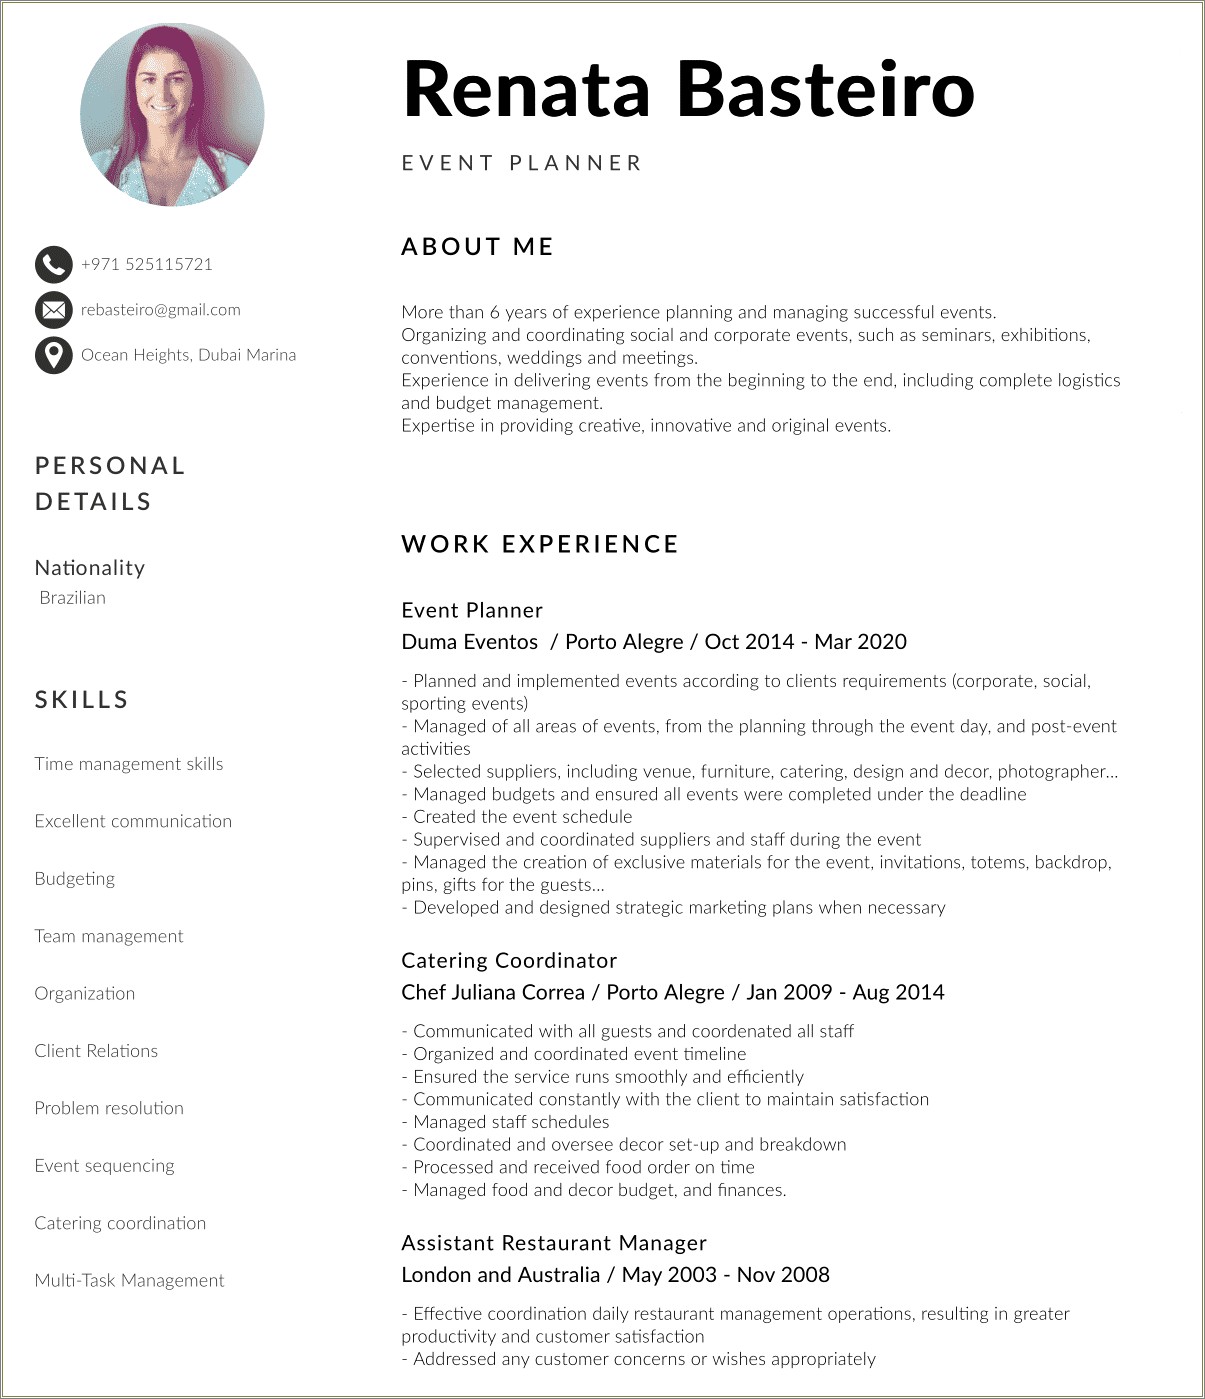 Resume Objective Statement Examples In Food Service Management